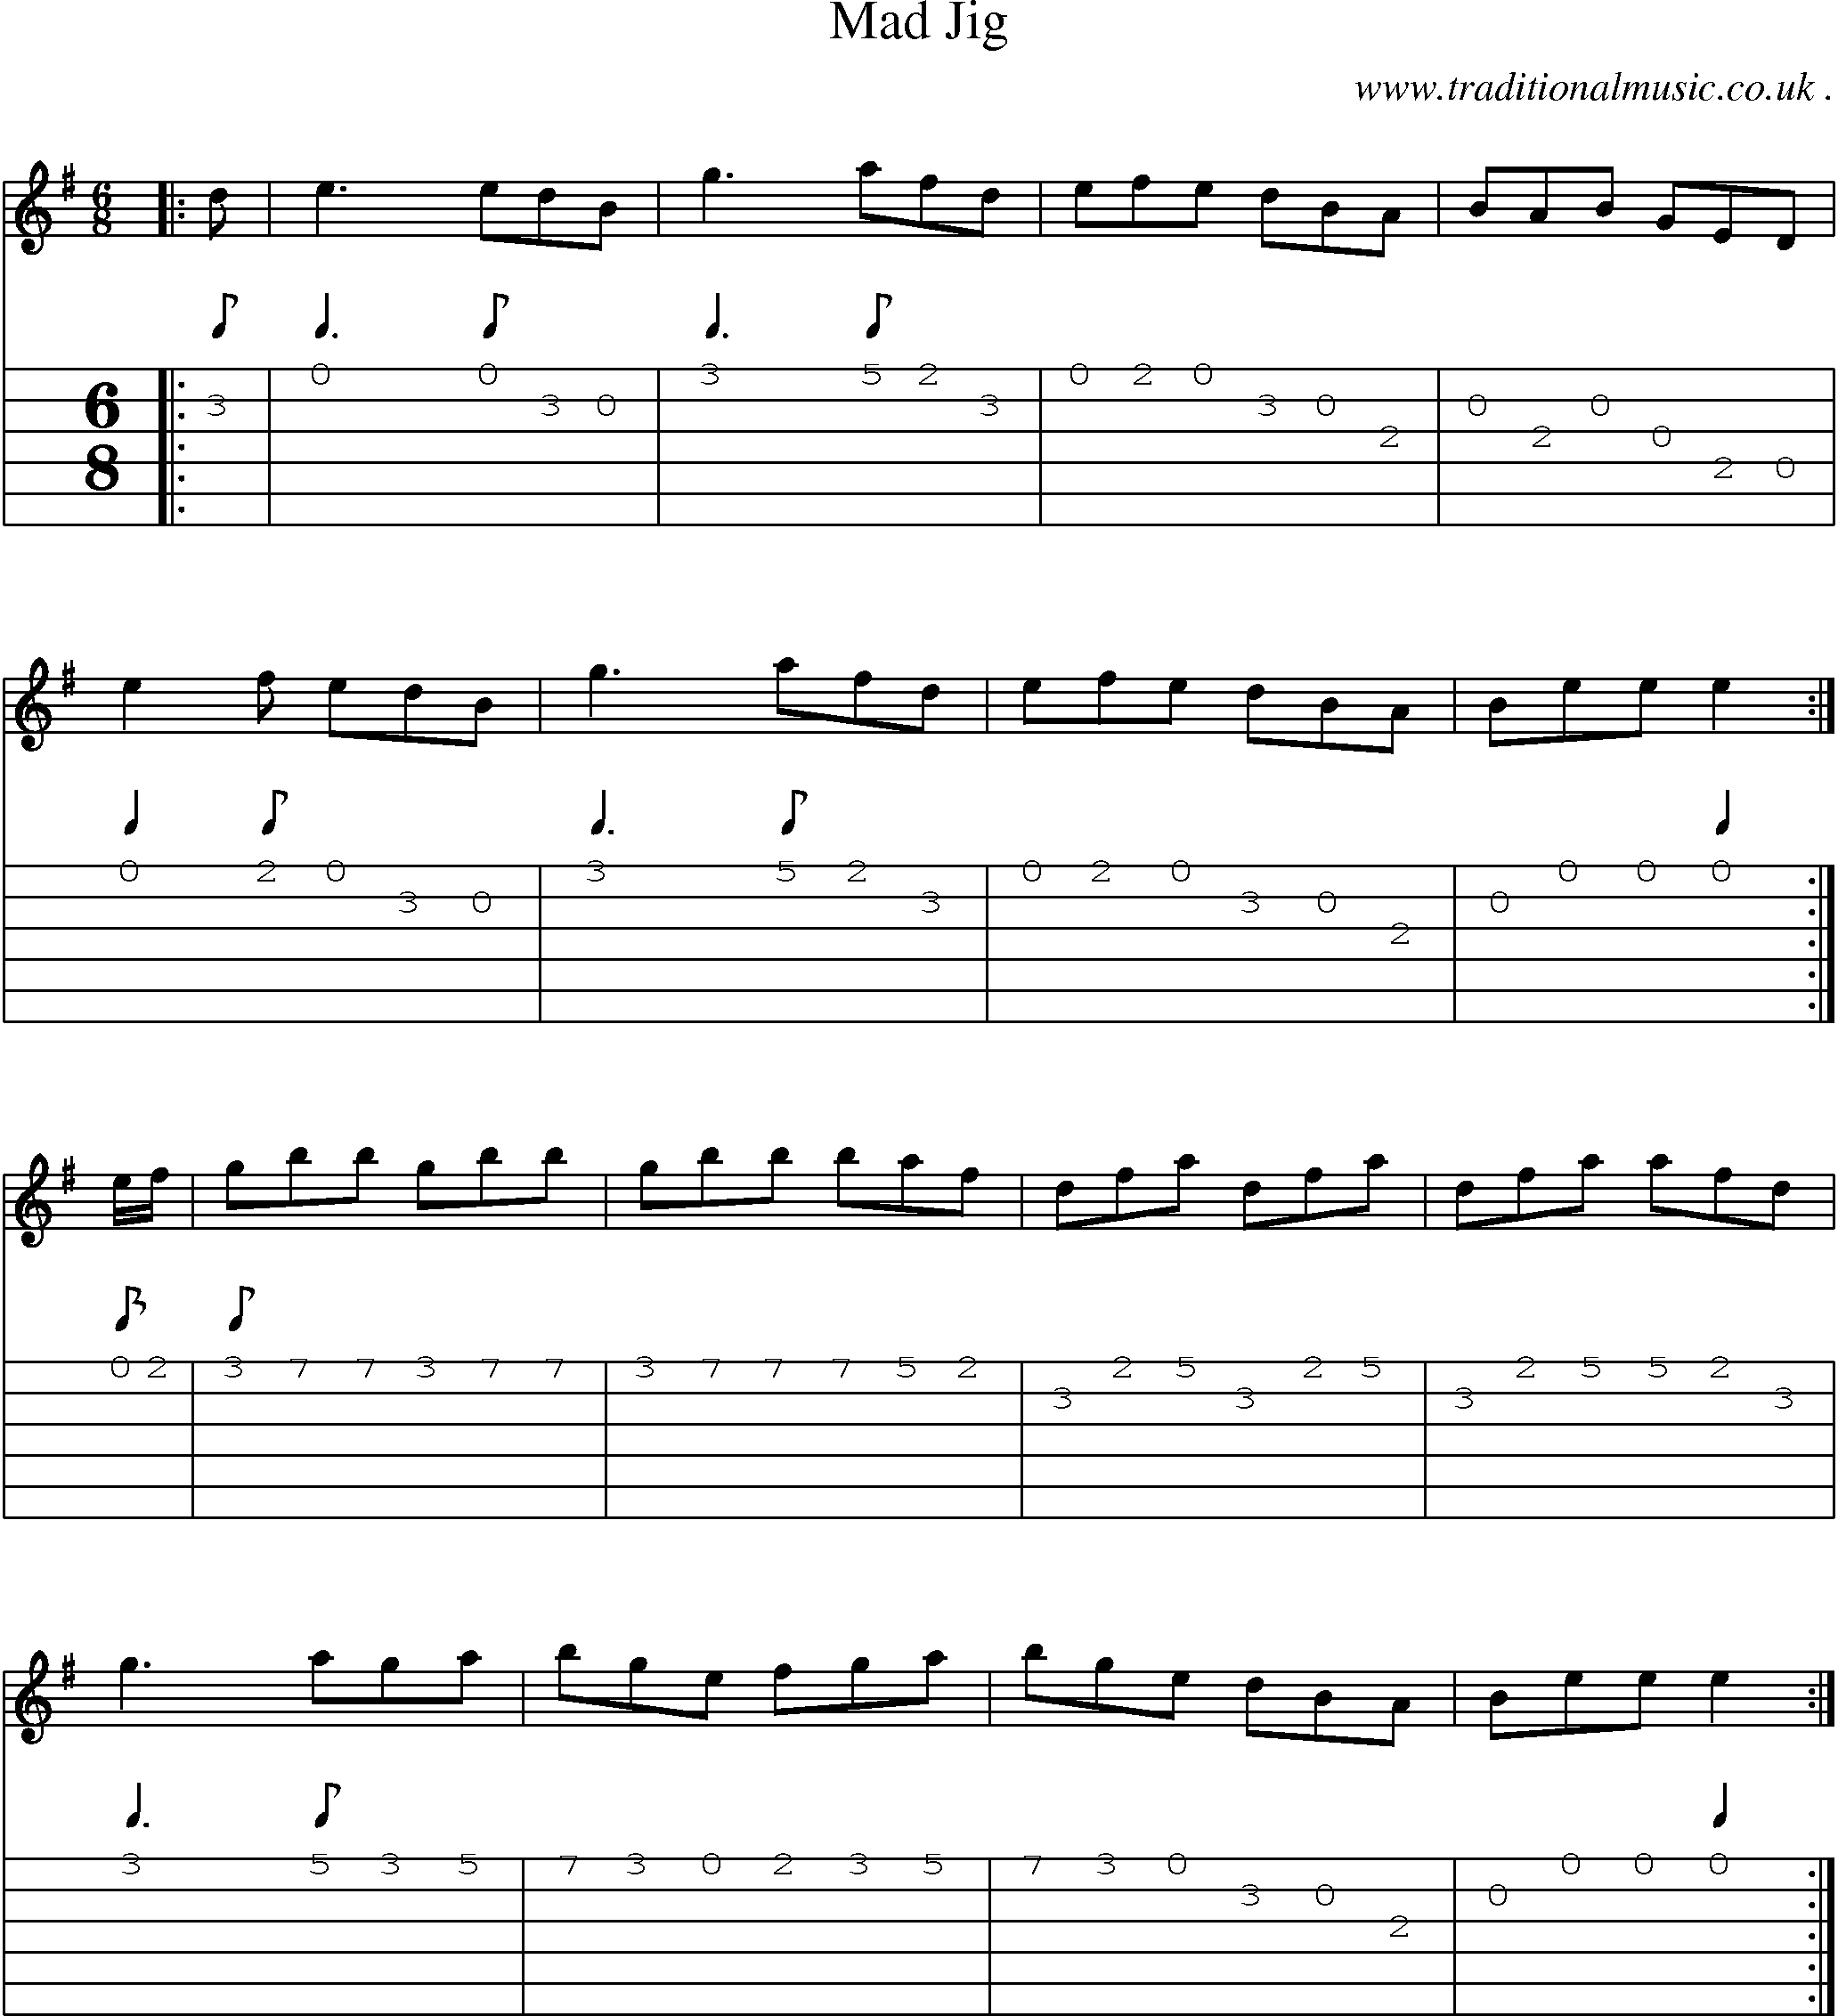 Sheet-Music and Guitar Tabs for Mad Jig